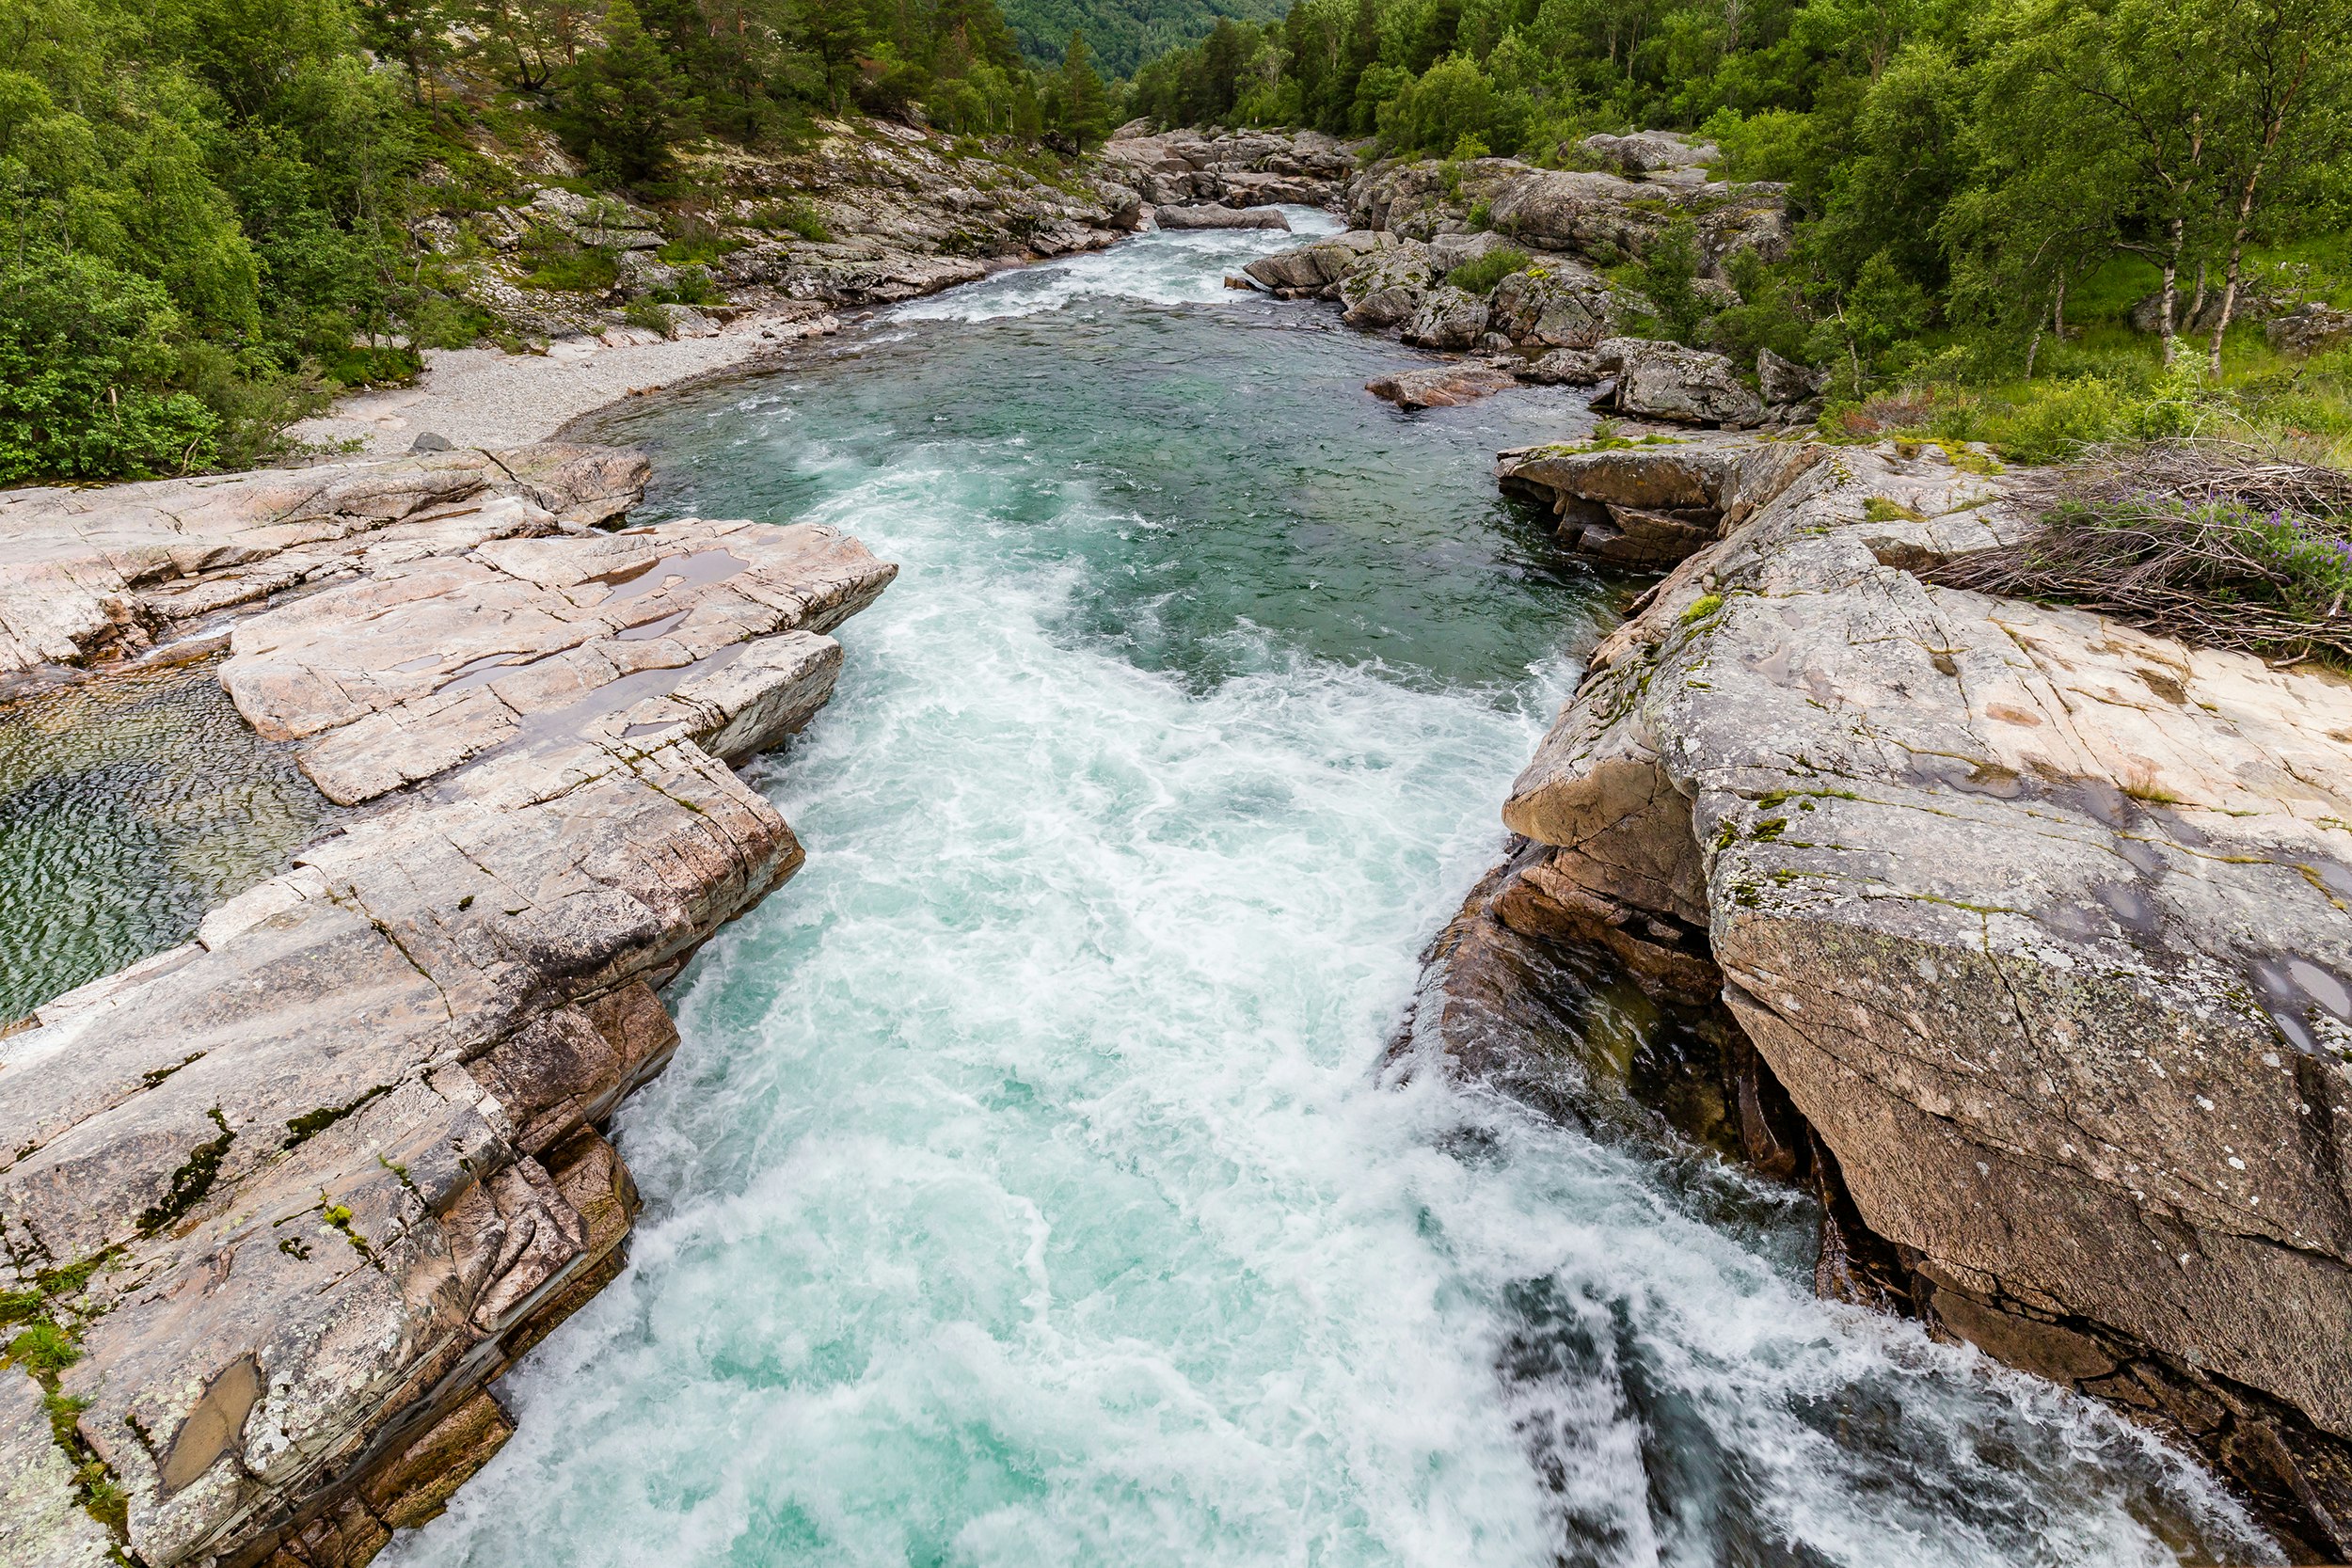 A river of whitewater surrounded by large boulders